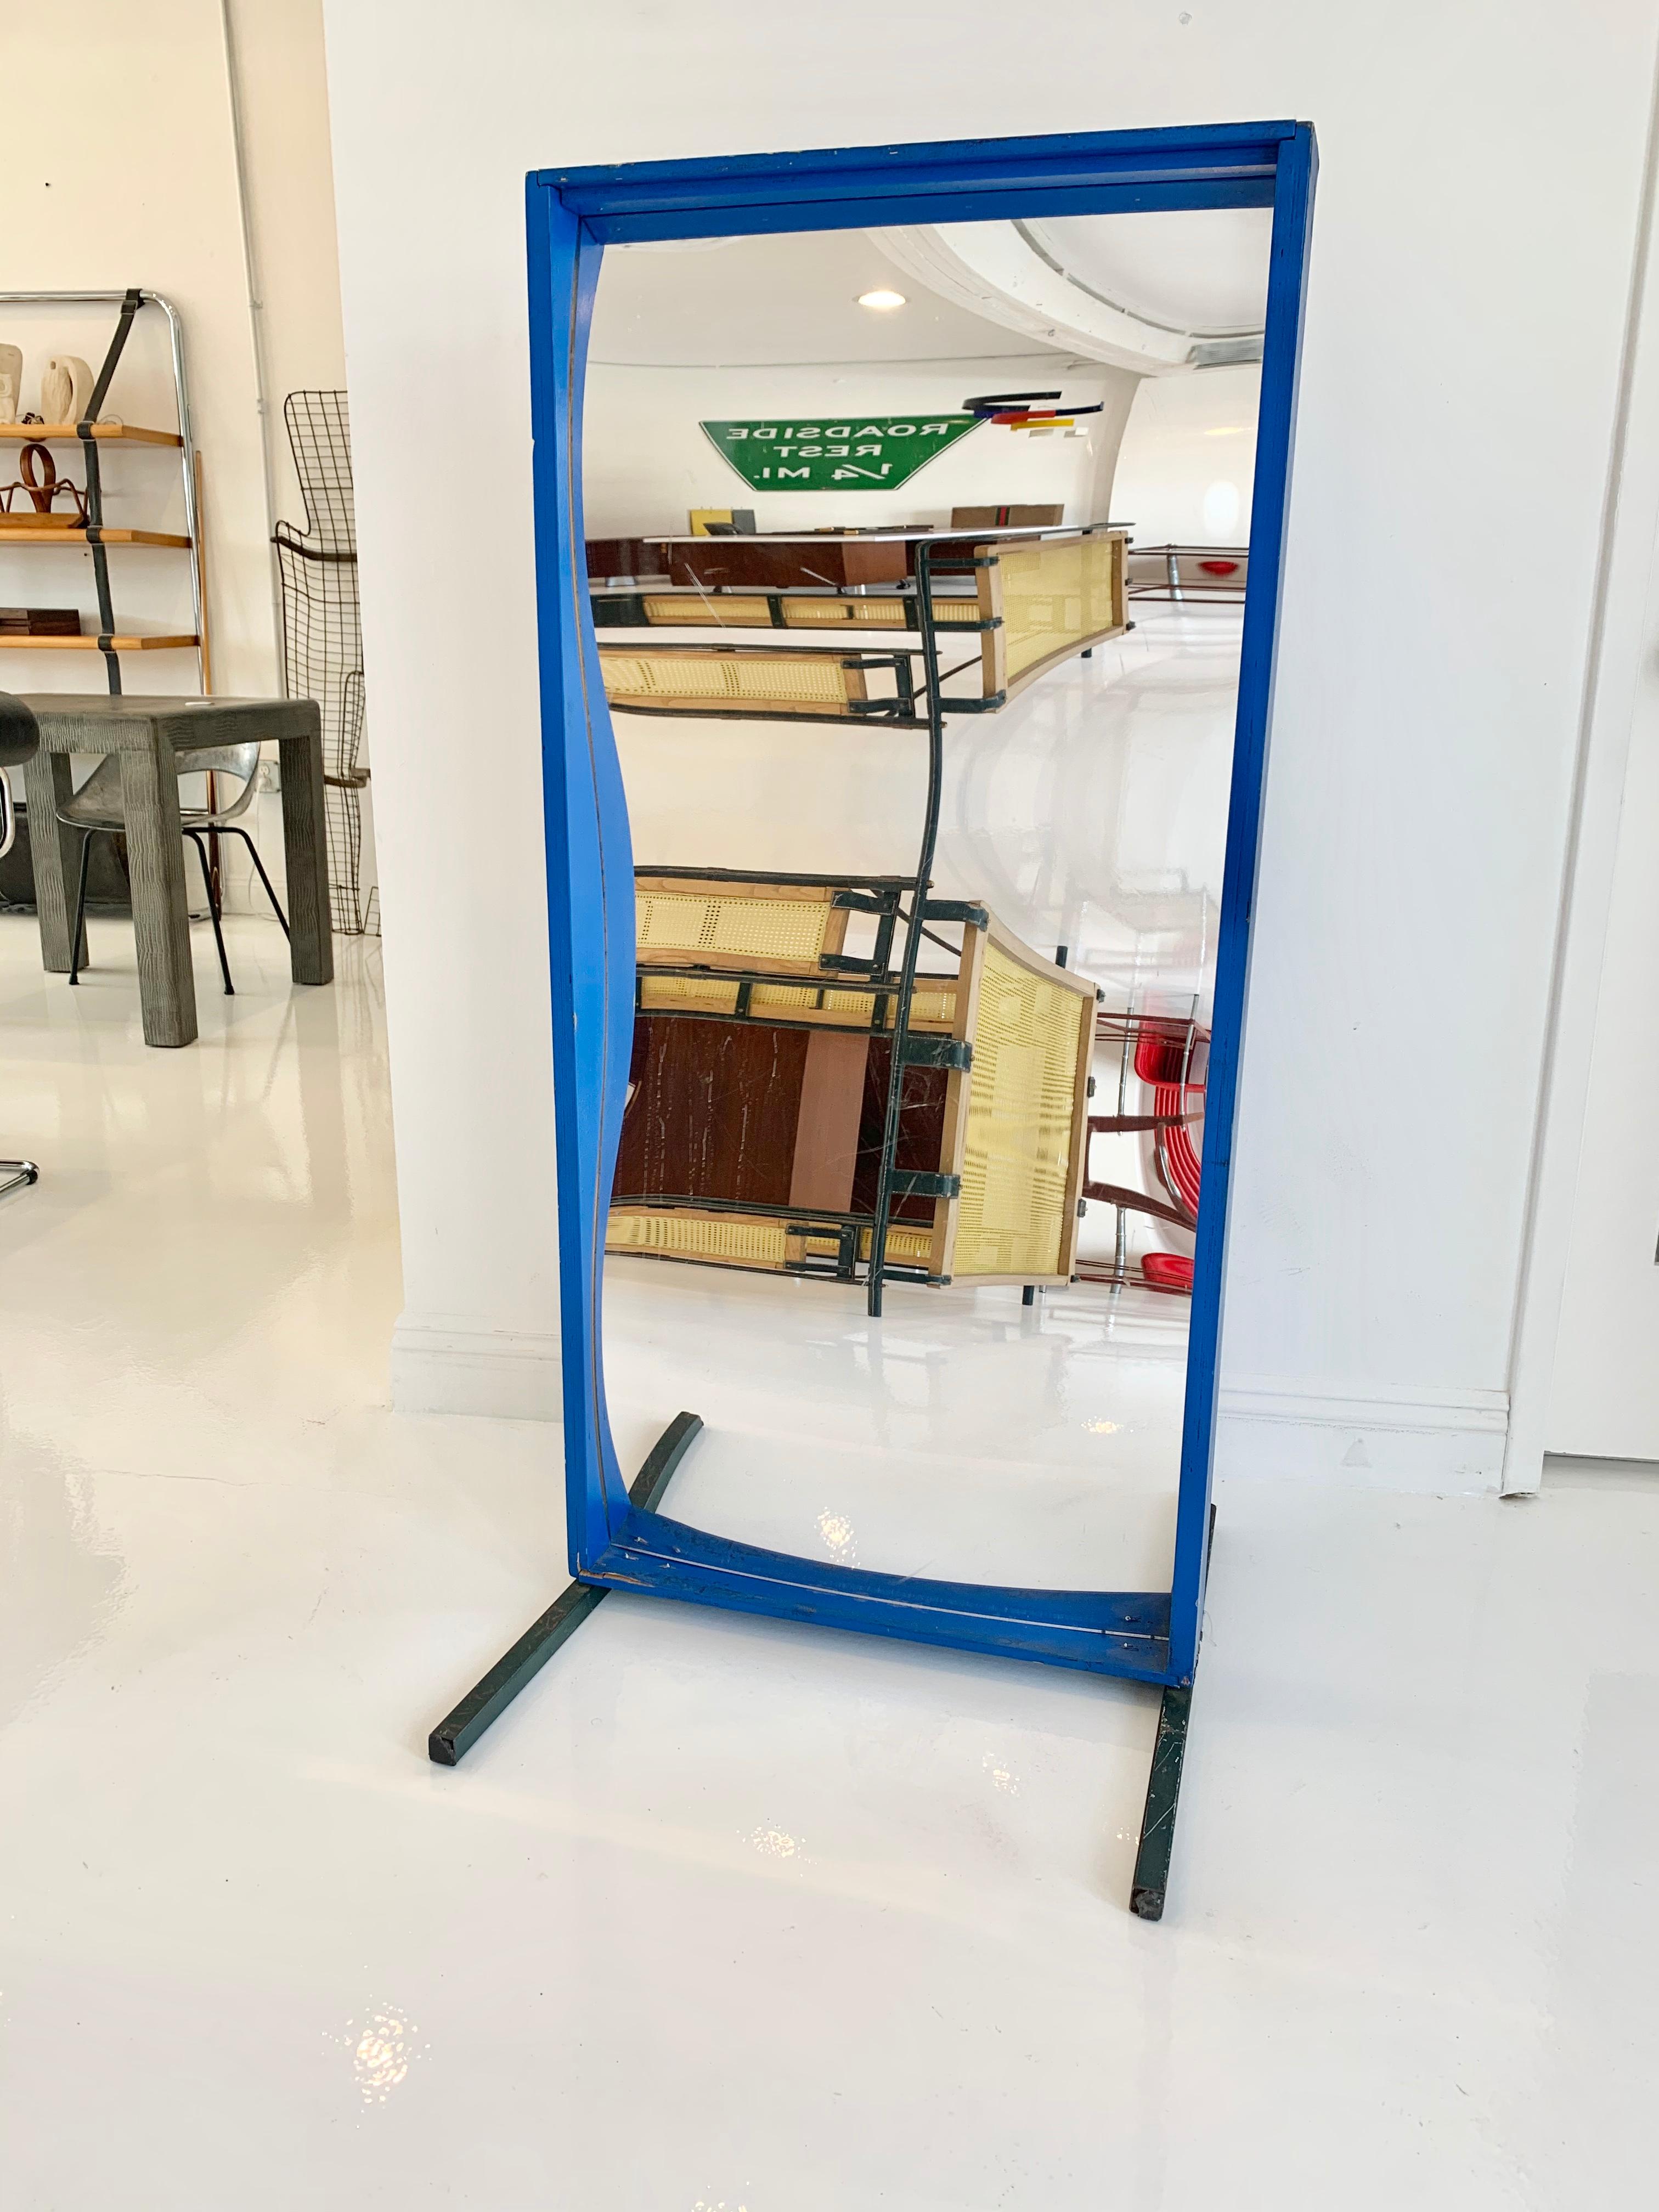 Very cool vintage wood carnival fun house mirror. Painted blue and mounted on a sturdy metal base. Curvy acrylic mirror in good vintage condition with some scratches and wear as shown. Fun piece of memorabilia.

Actual wood mirror measures: 4